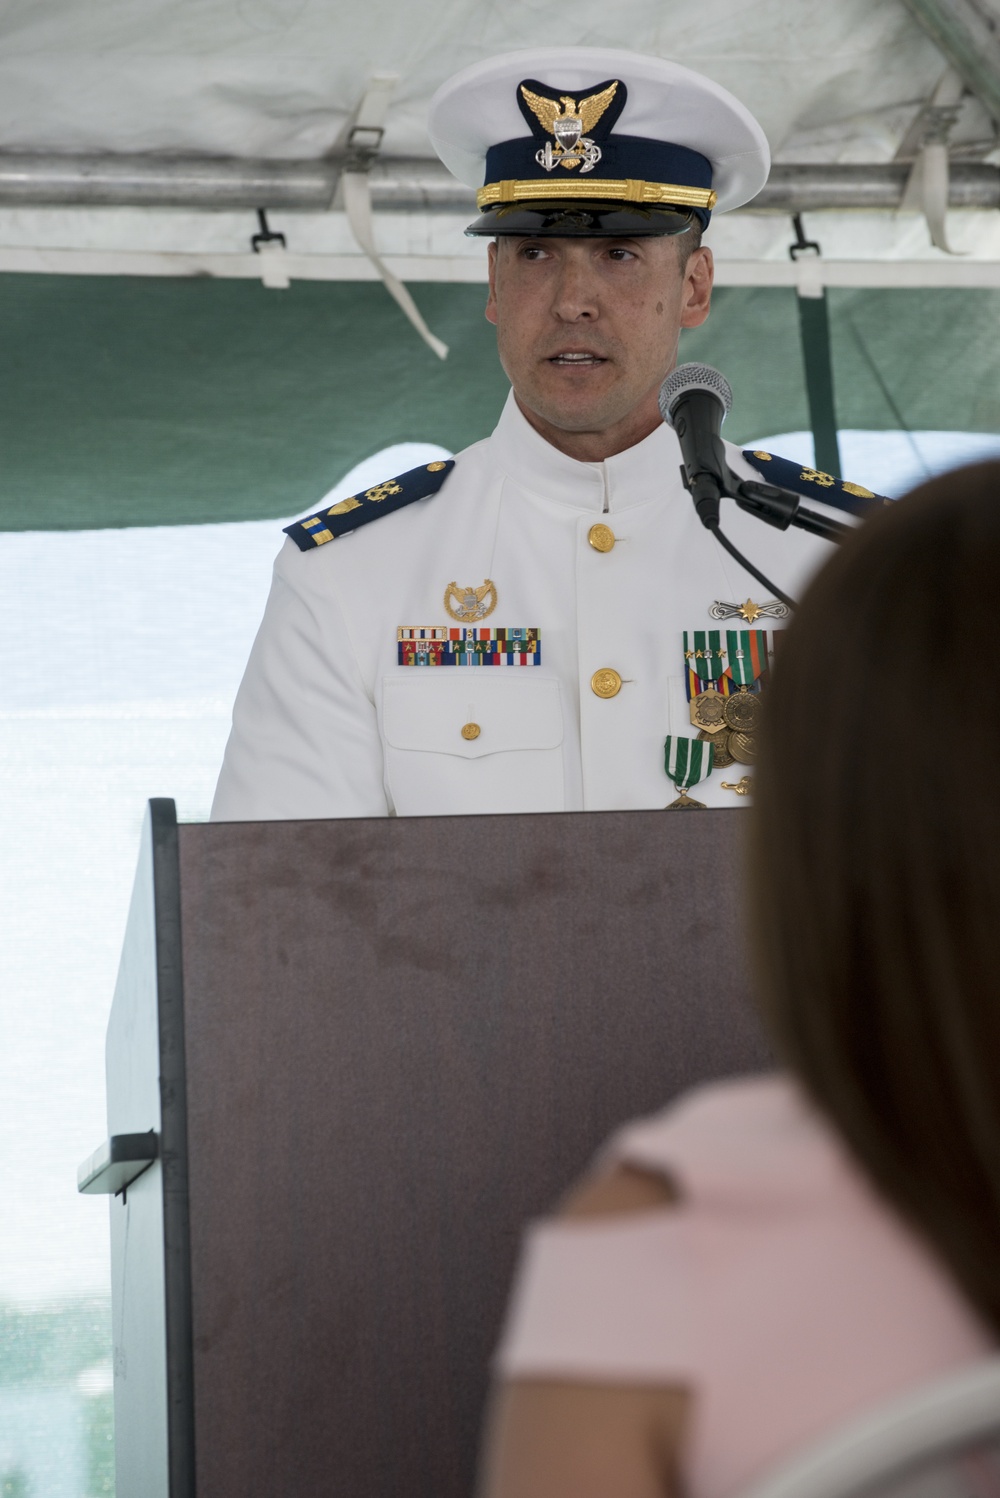 Coast Guard Station Sand Key holds change of command in Clearwater, Fla.